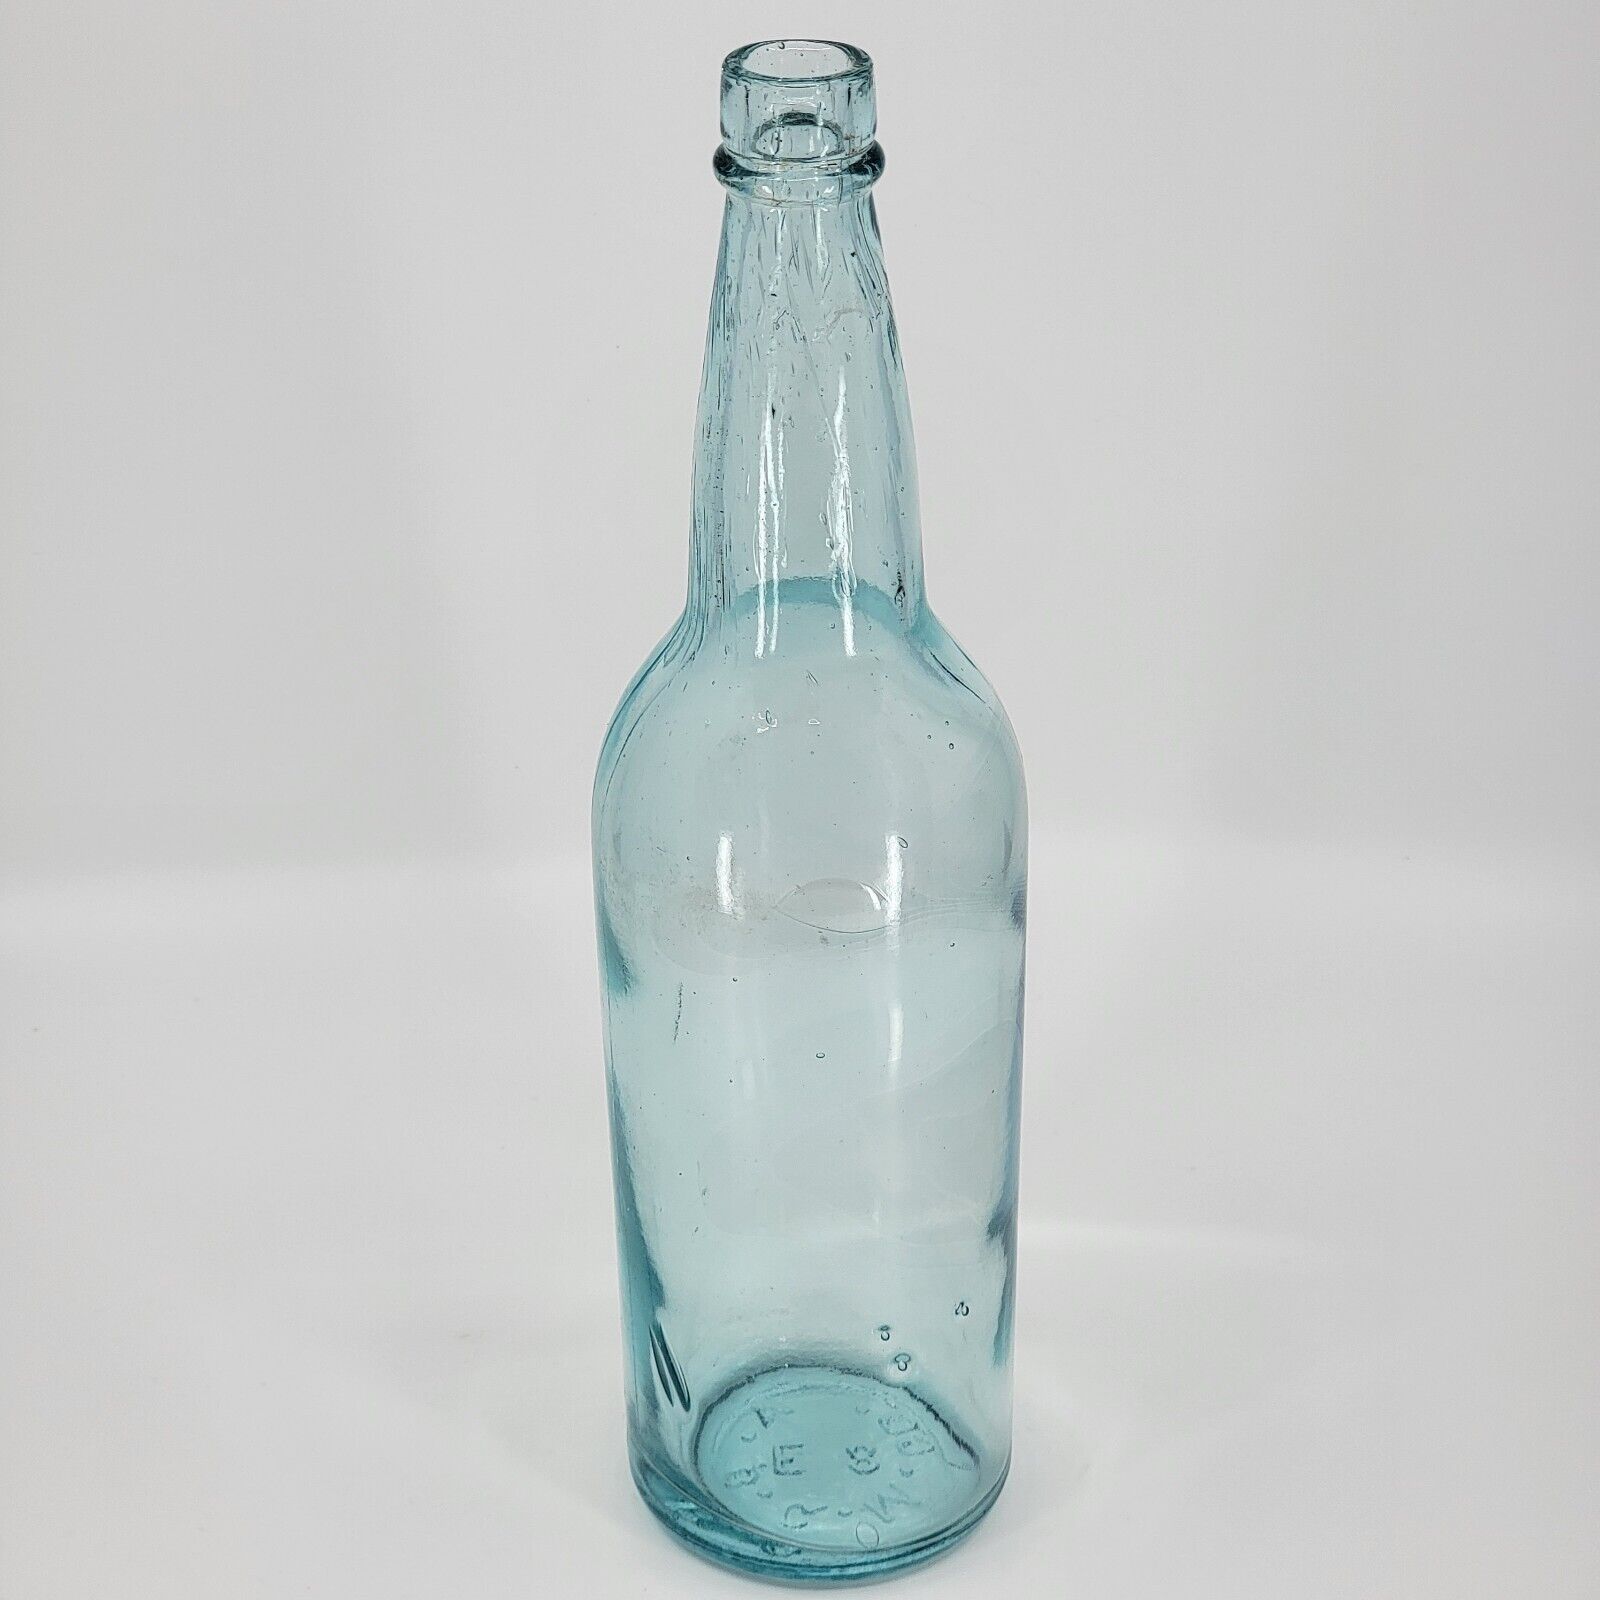 Rare Vintage A.B.G.M. Co. Aqua Blue Glass Empty Beer Bottle, Early 1900s